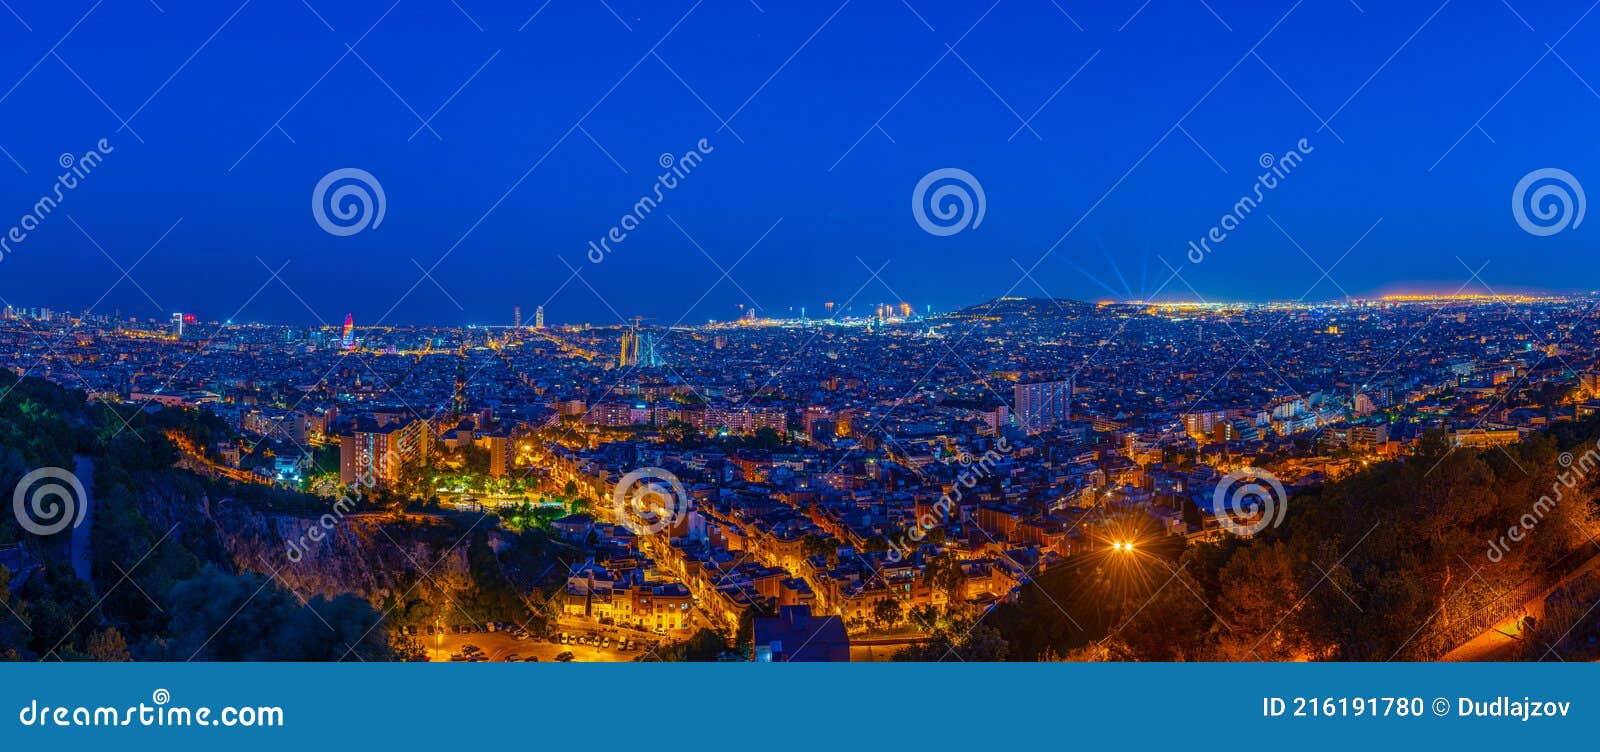 night view of the downtown and ciutat vella of barcelona, spain